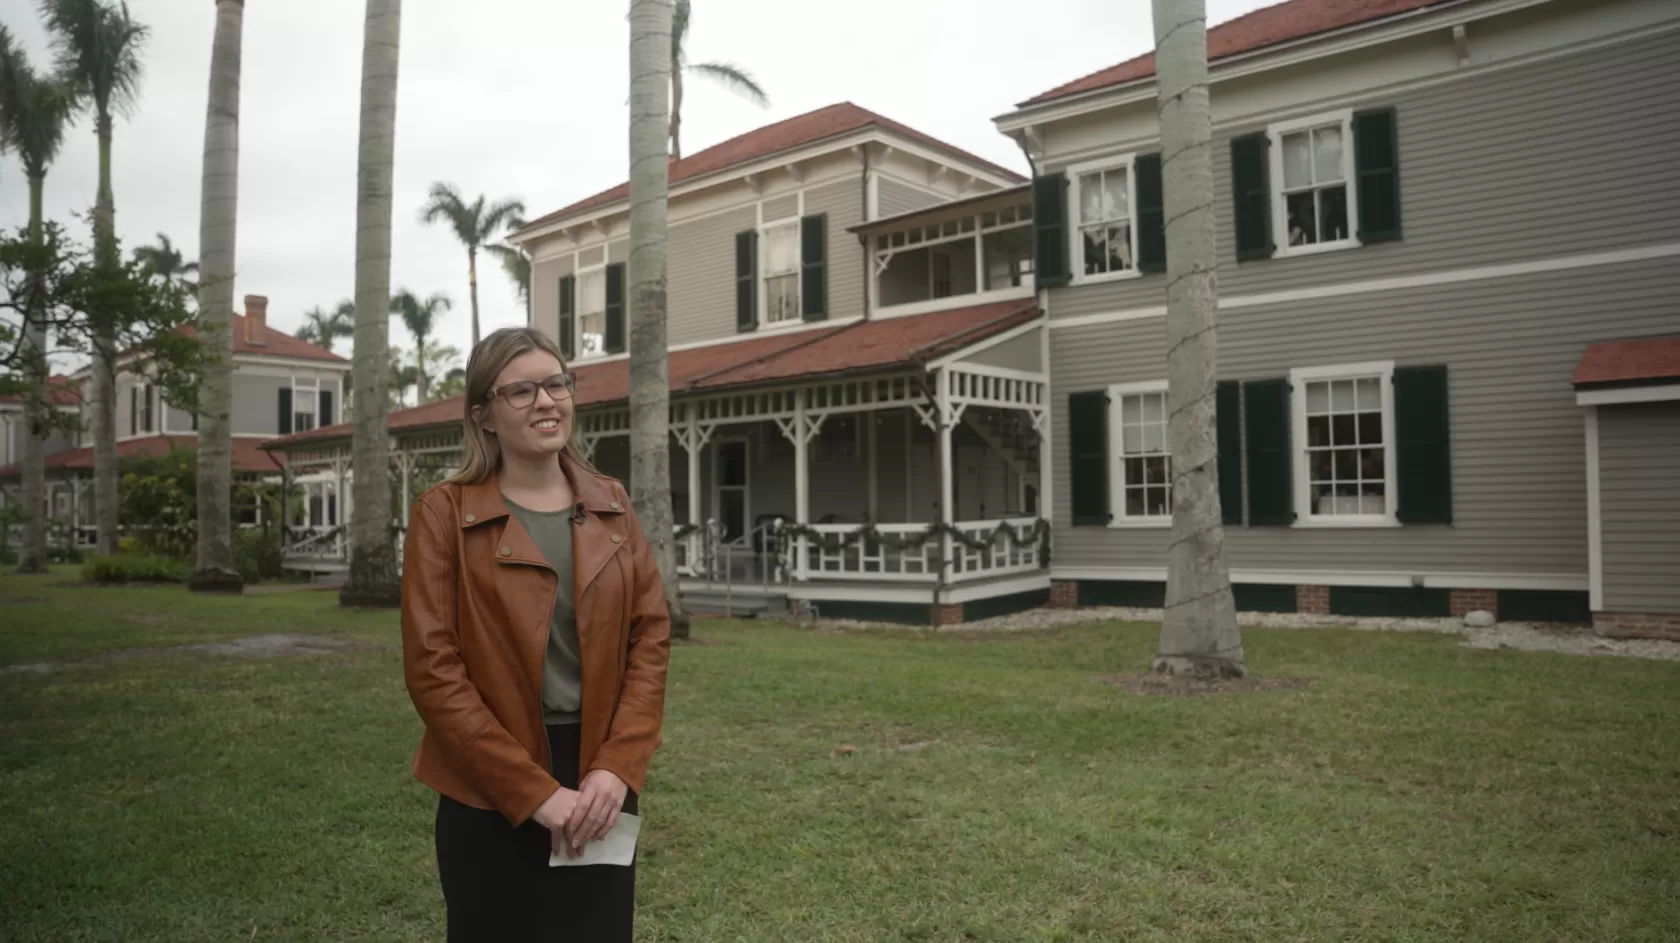 A woman holding a photo stands in front of the historic Edison home in Fort Myers